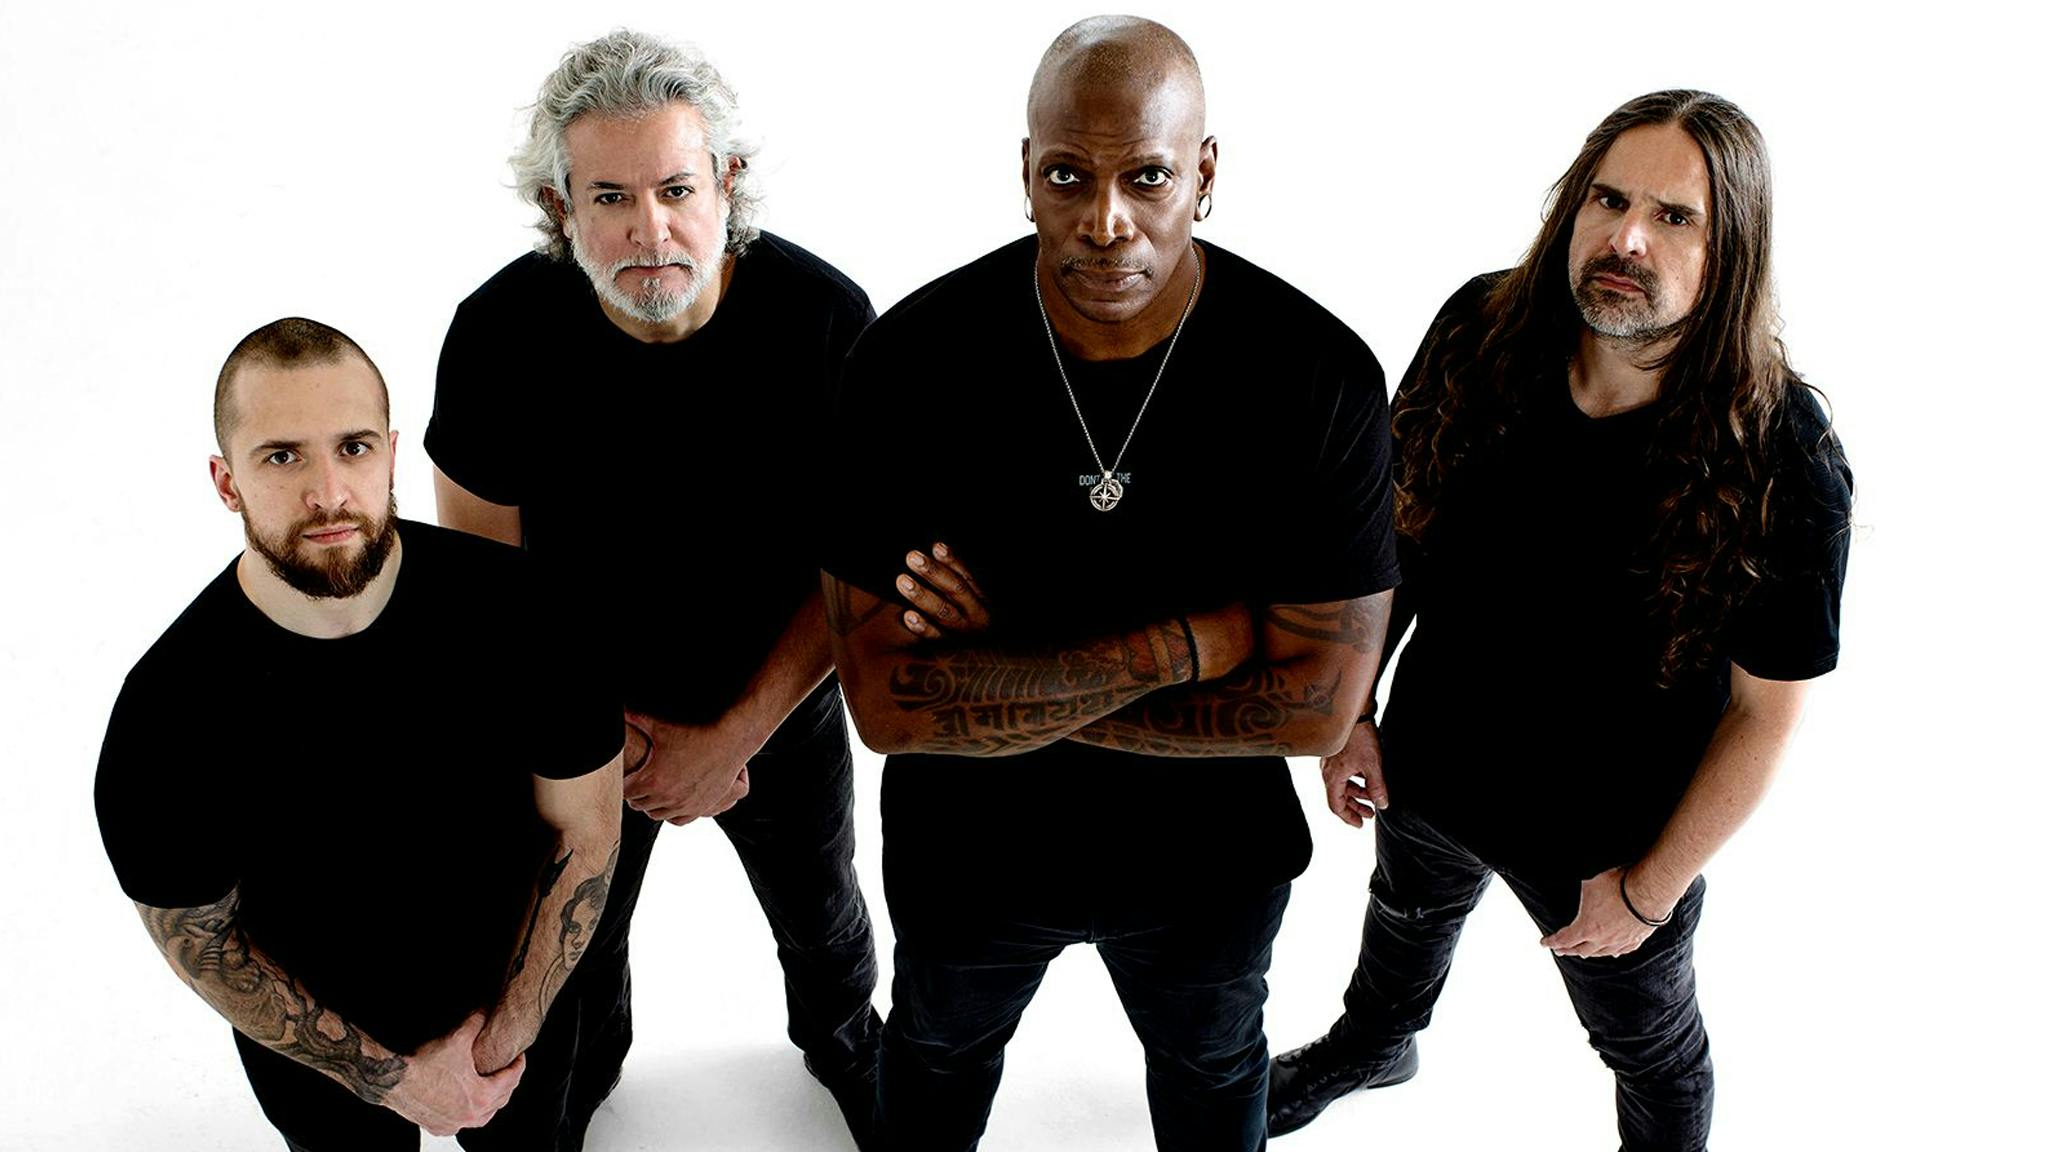 Sepultura announce farewell tour after reaching “the end of the road”